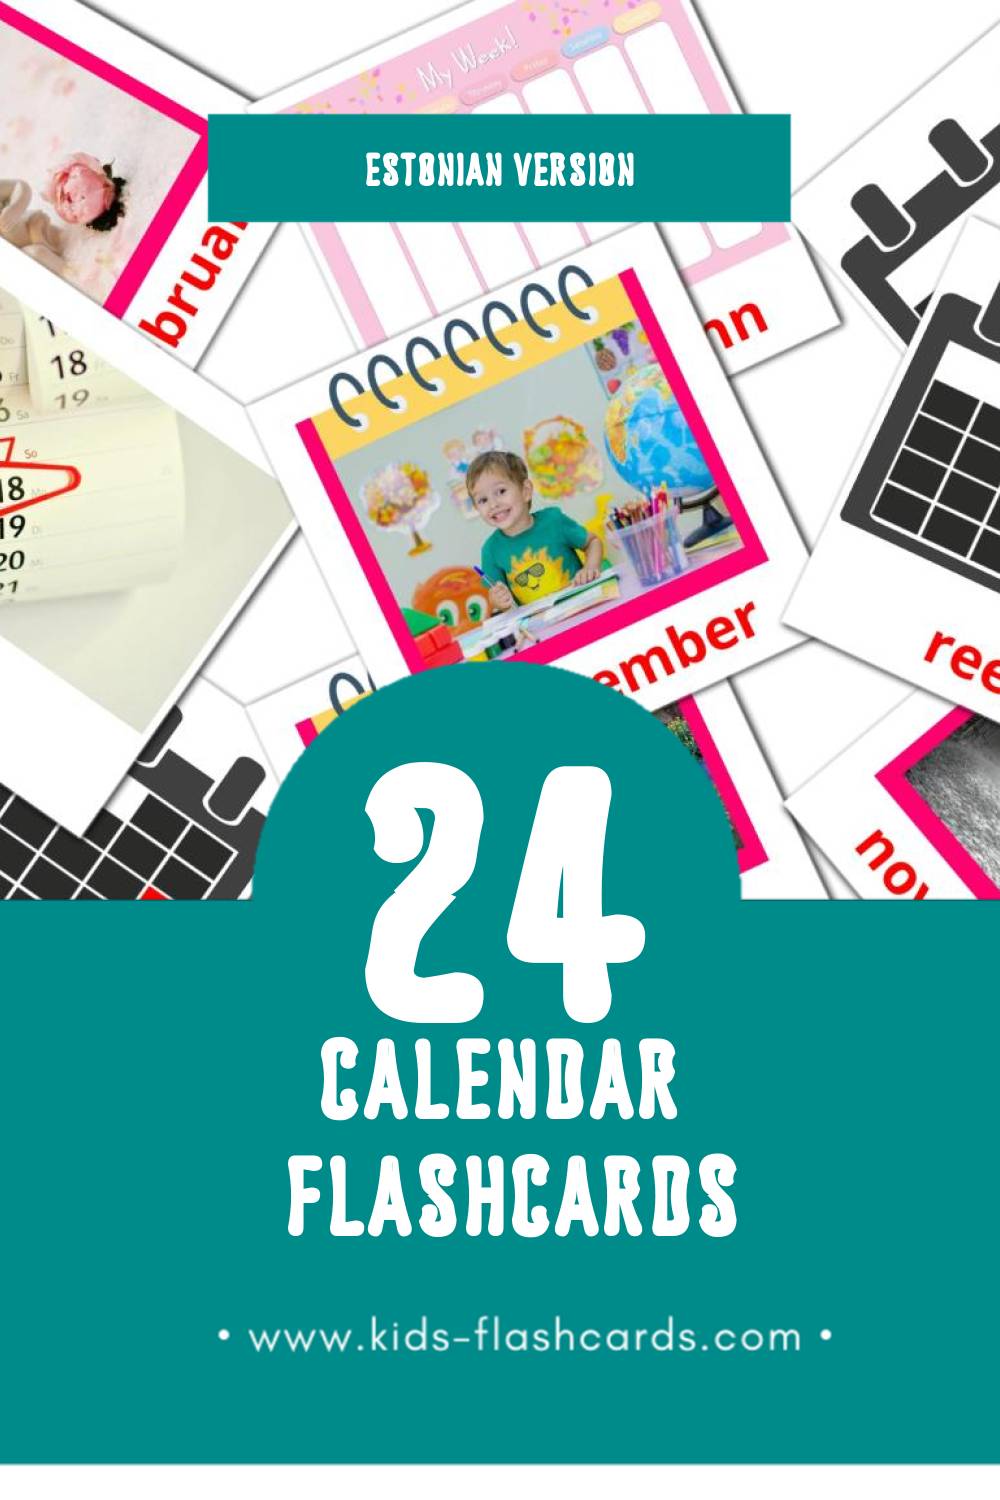 Visual Kalender Flashcards for Toddlers (24 cards in Estonian)